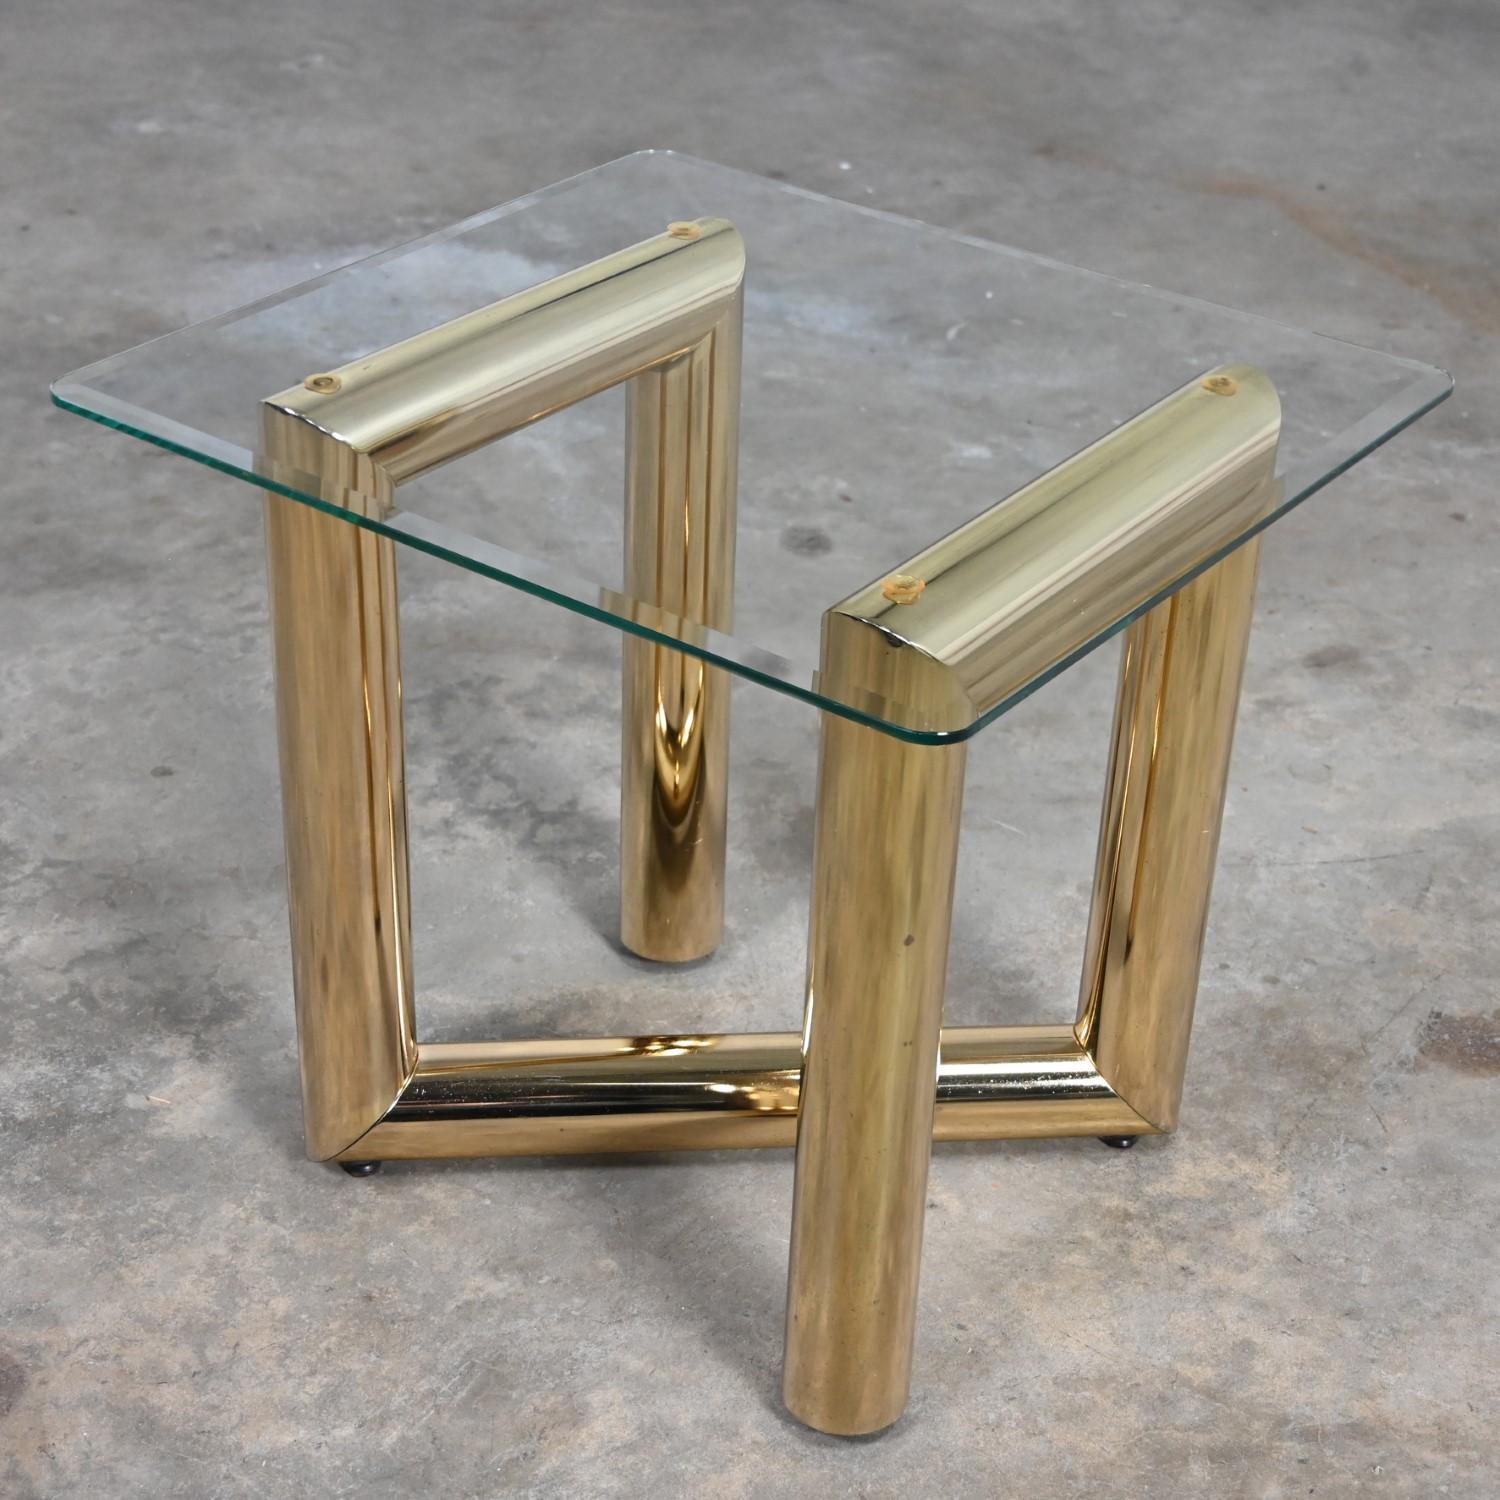 1970s Modern Brass Plated End or Side Table Square Glass Top Style Karl Springer For Sale 2